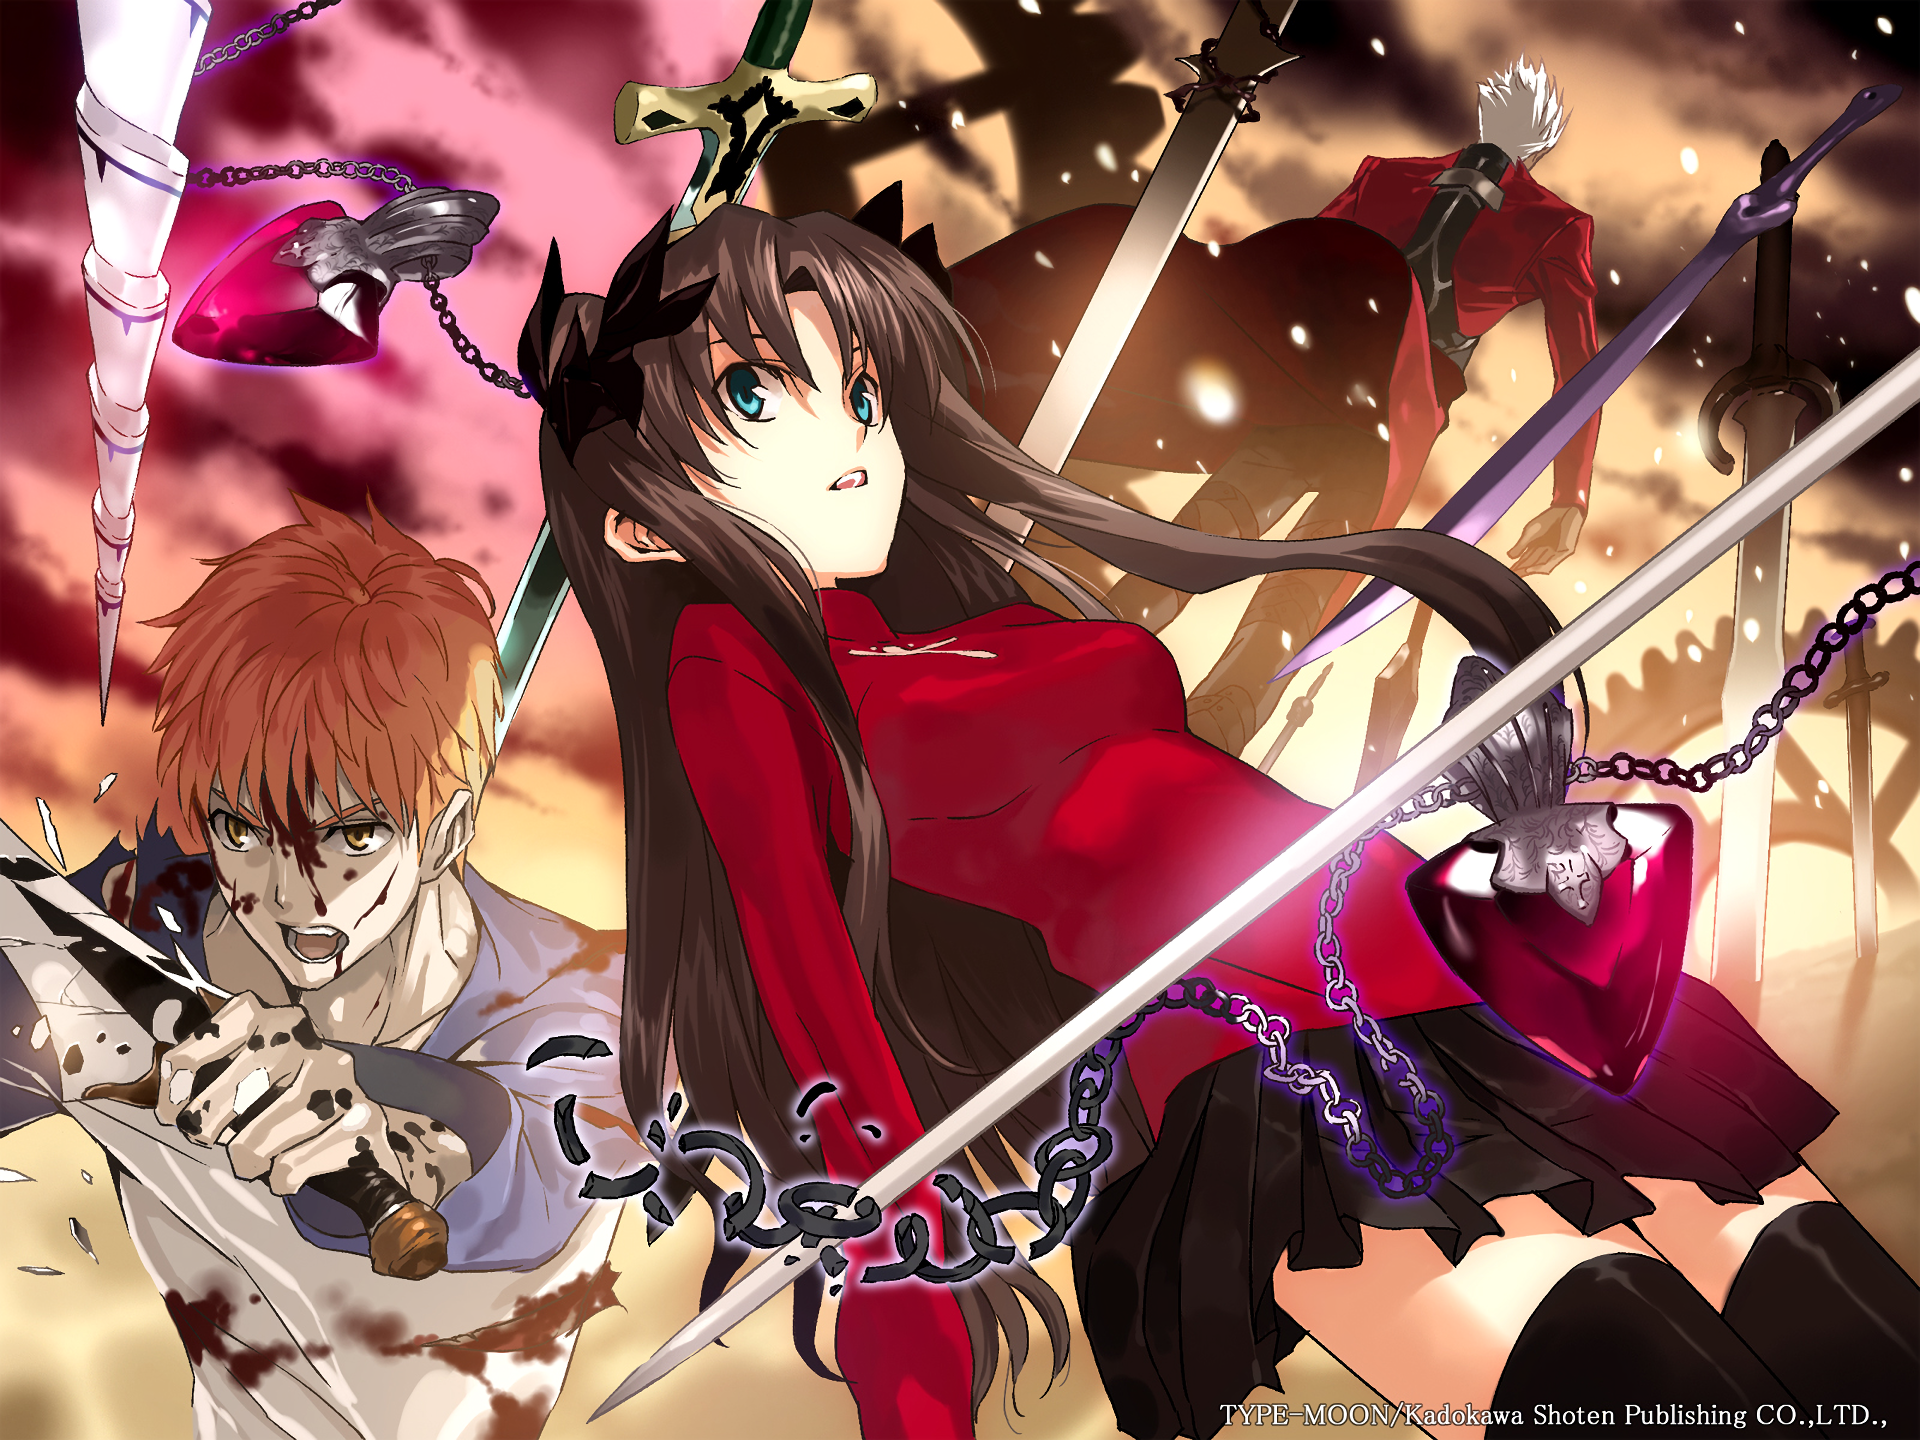 Shiroh and Rin from Fate/Stay Night, standing together with Archer.